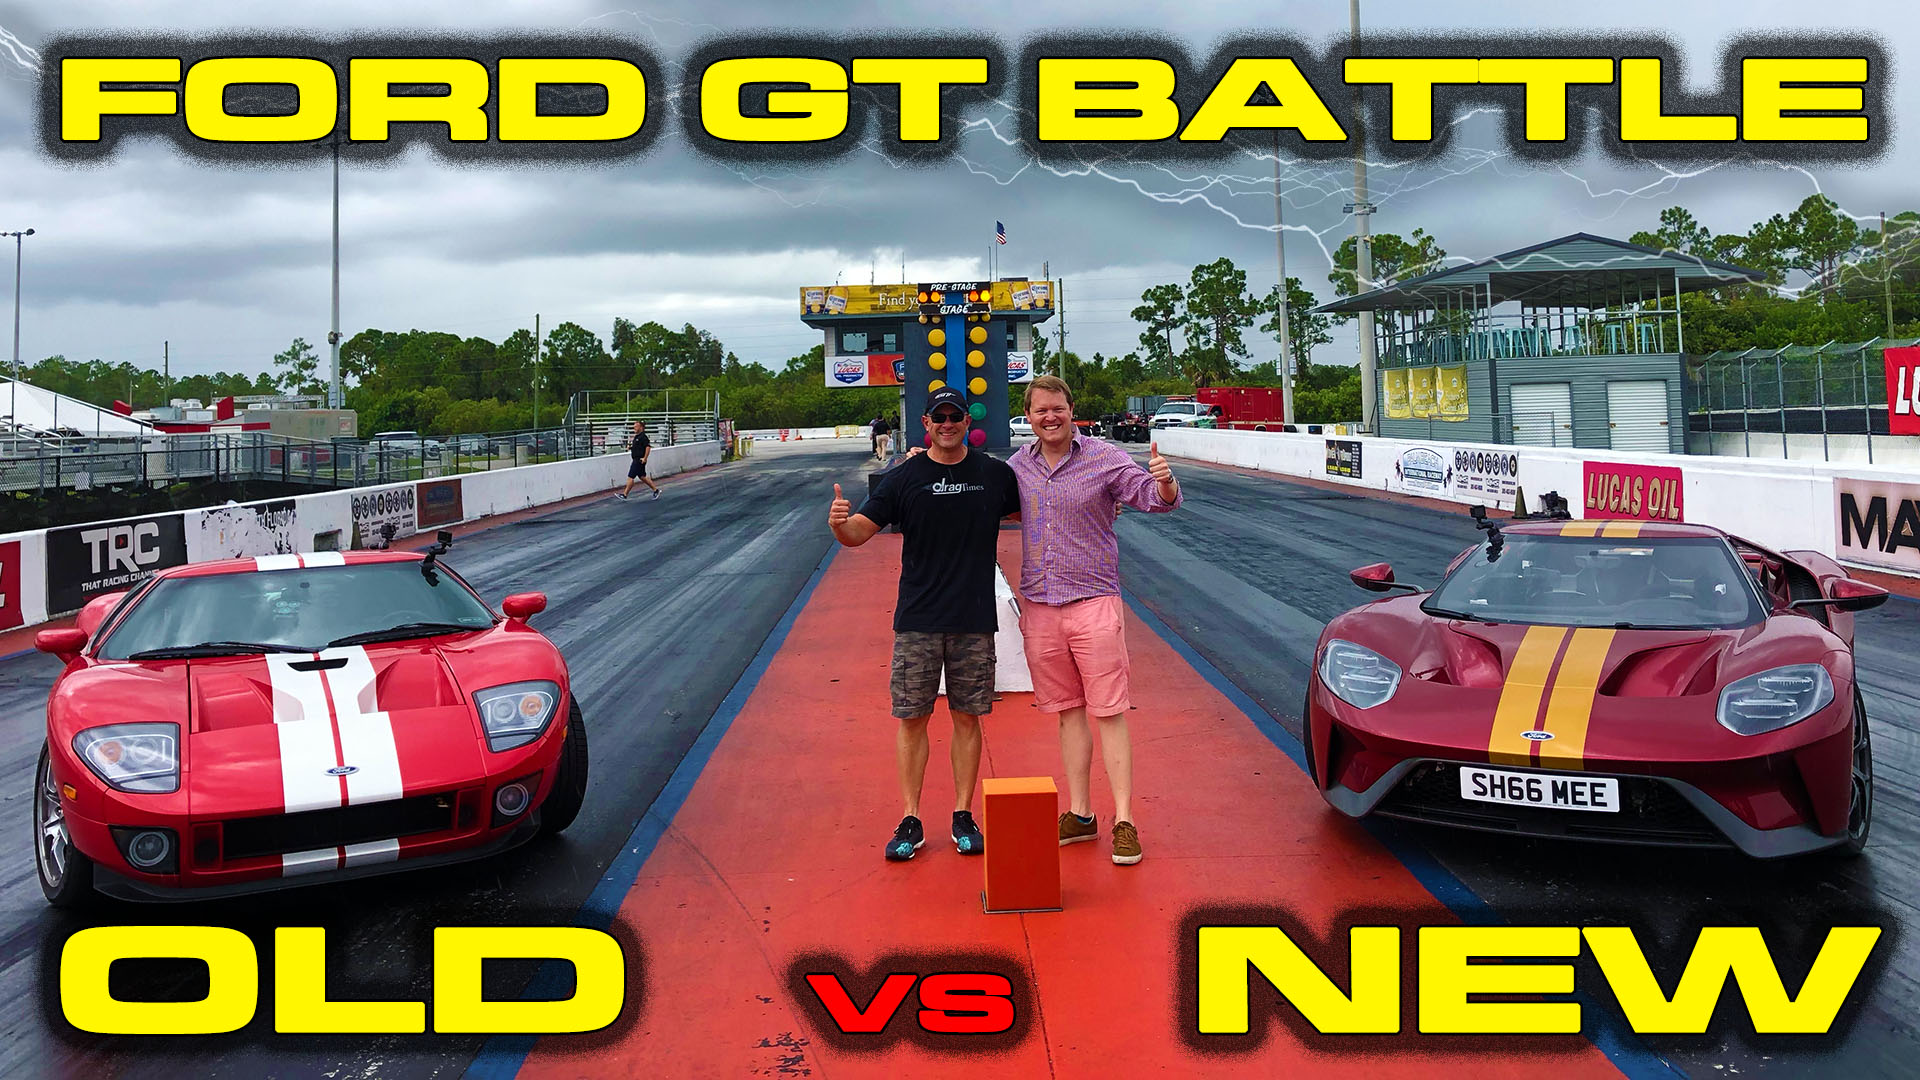 New vs old Ford GT Racing